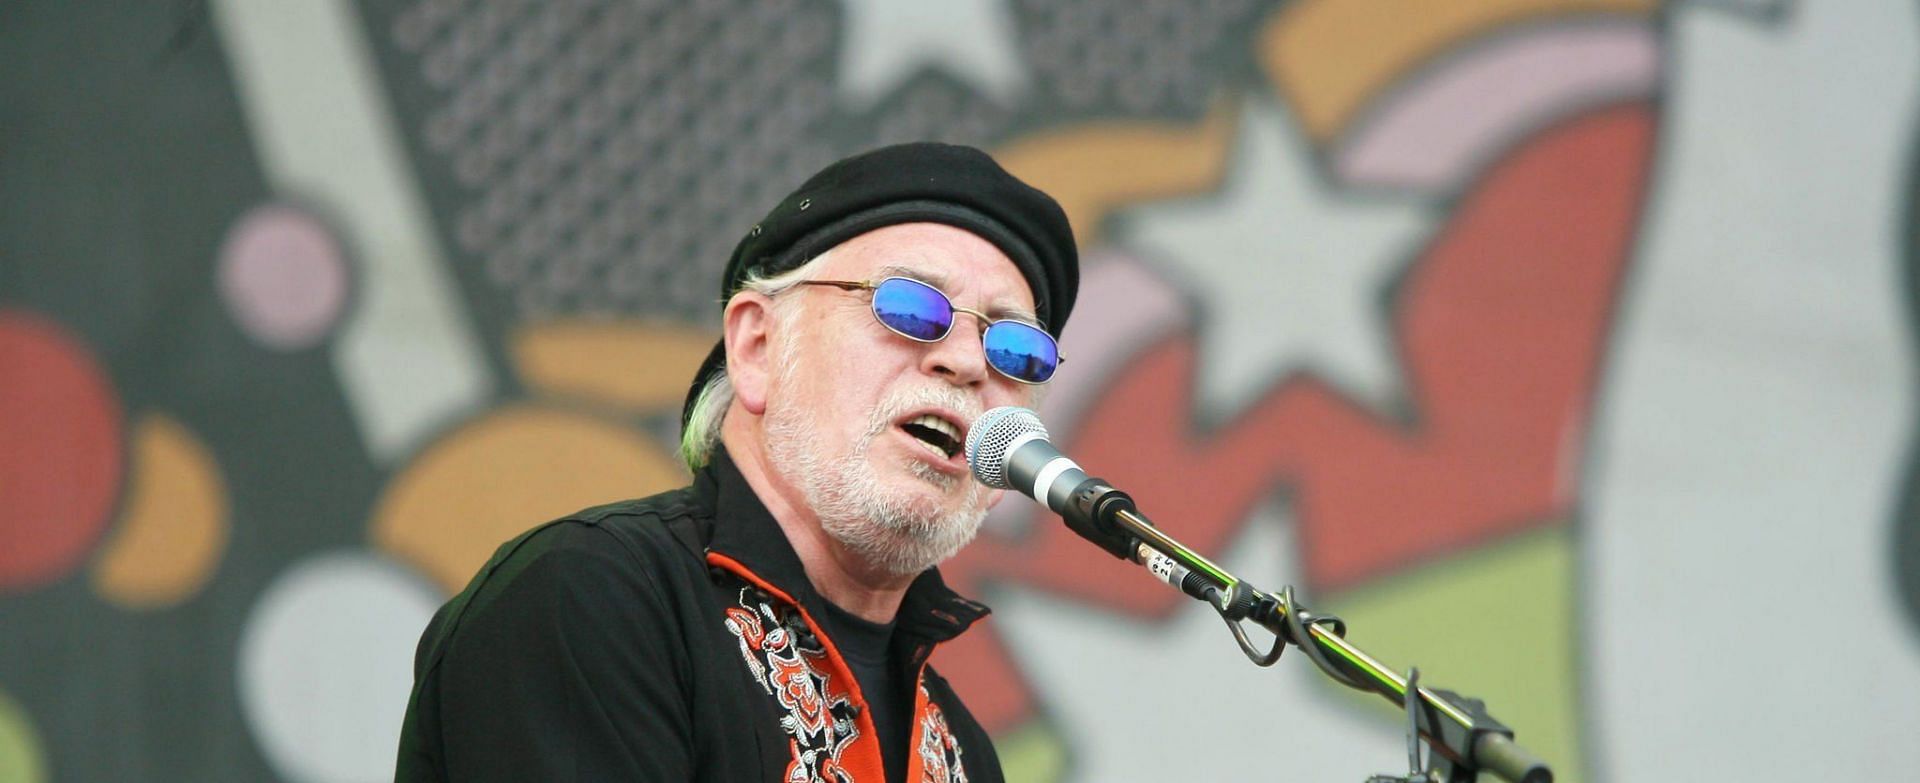 Gary Brooker founded Procol Harum in 1966 (Image via Andy Paradise/WireImage)